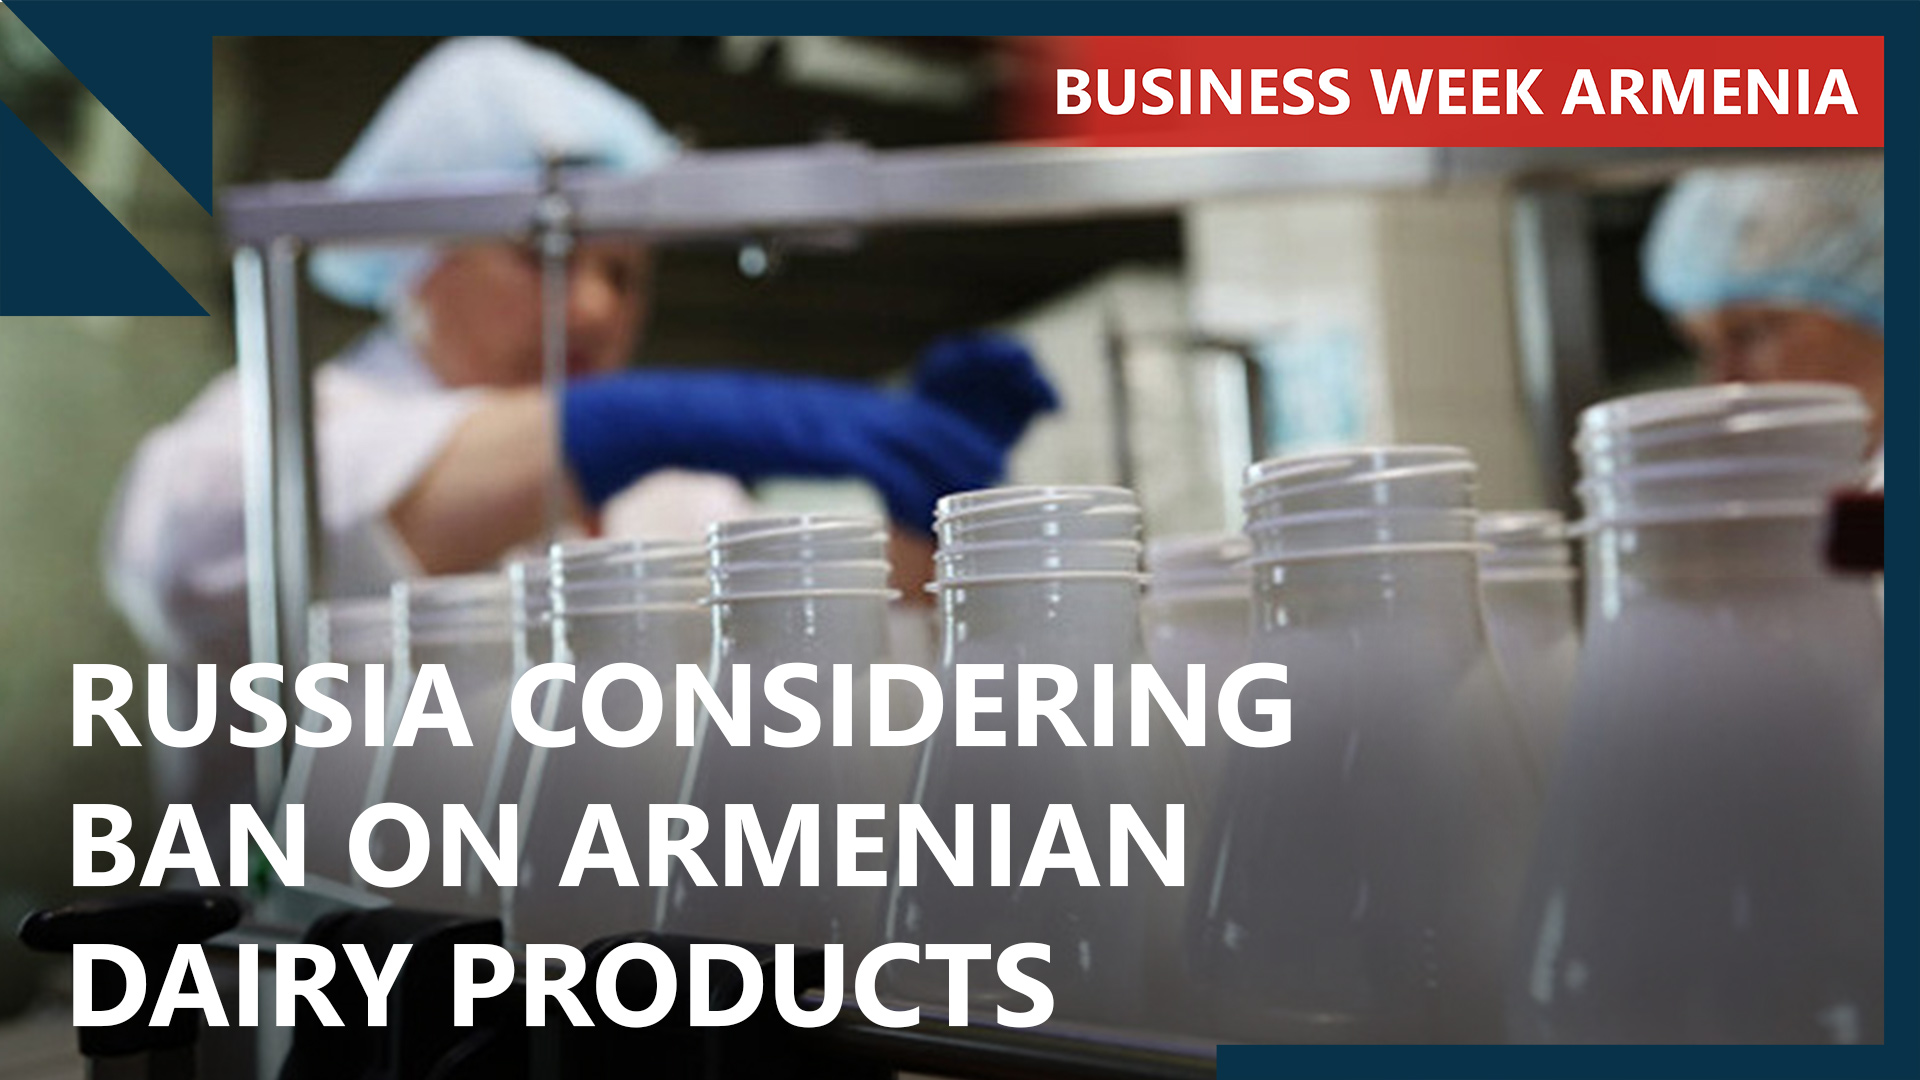 Business Week Armenia: Russia considering ban on Armenian dairy products